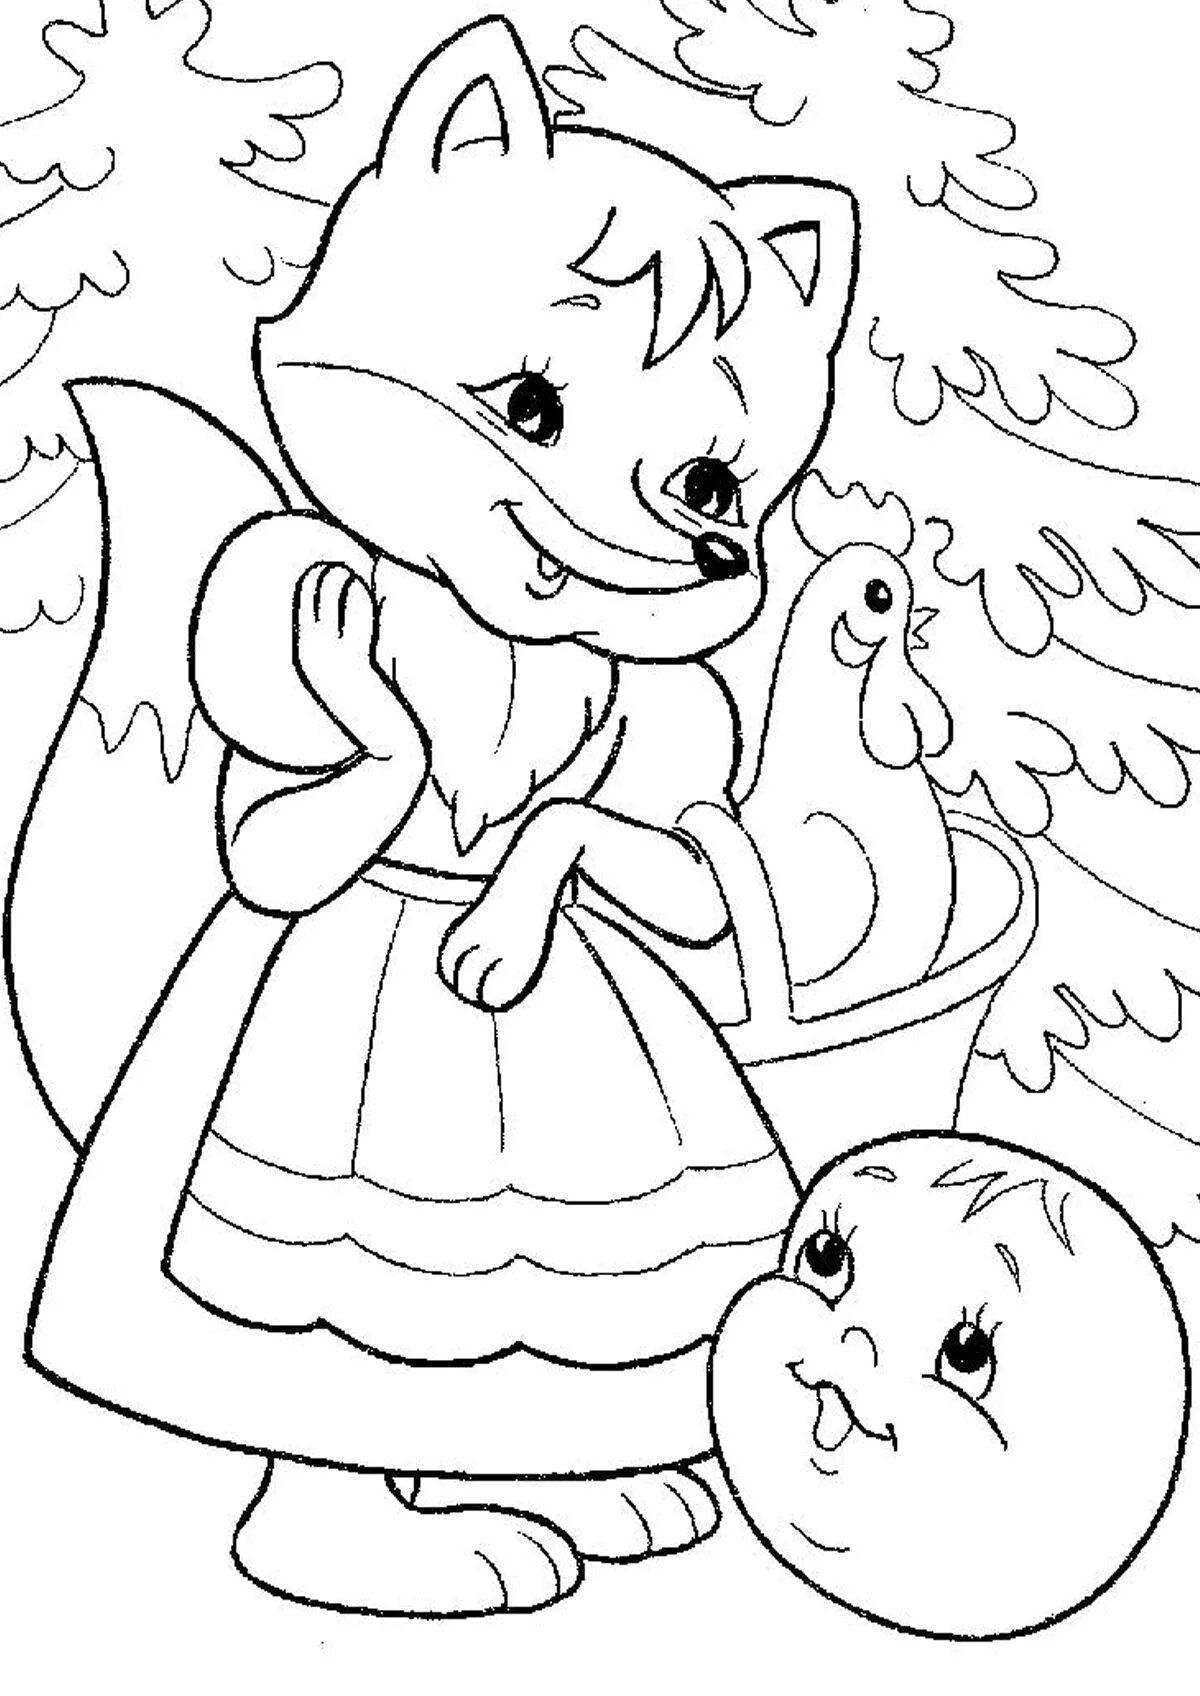 Majestic coloring pages heroes of fairy tales for children